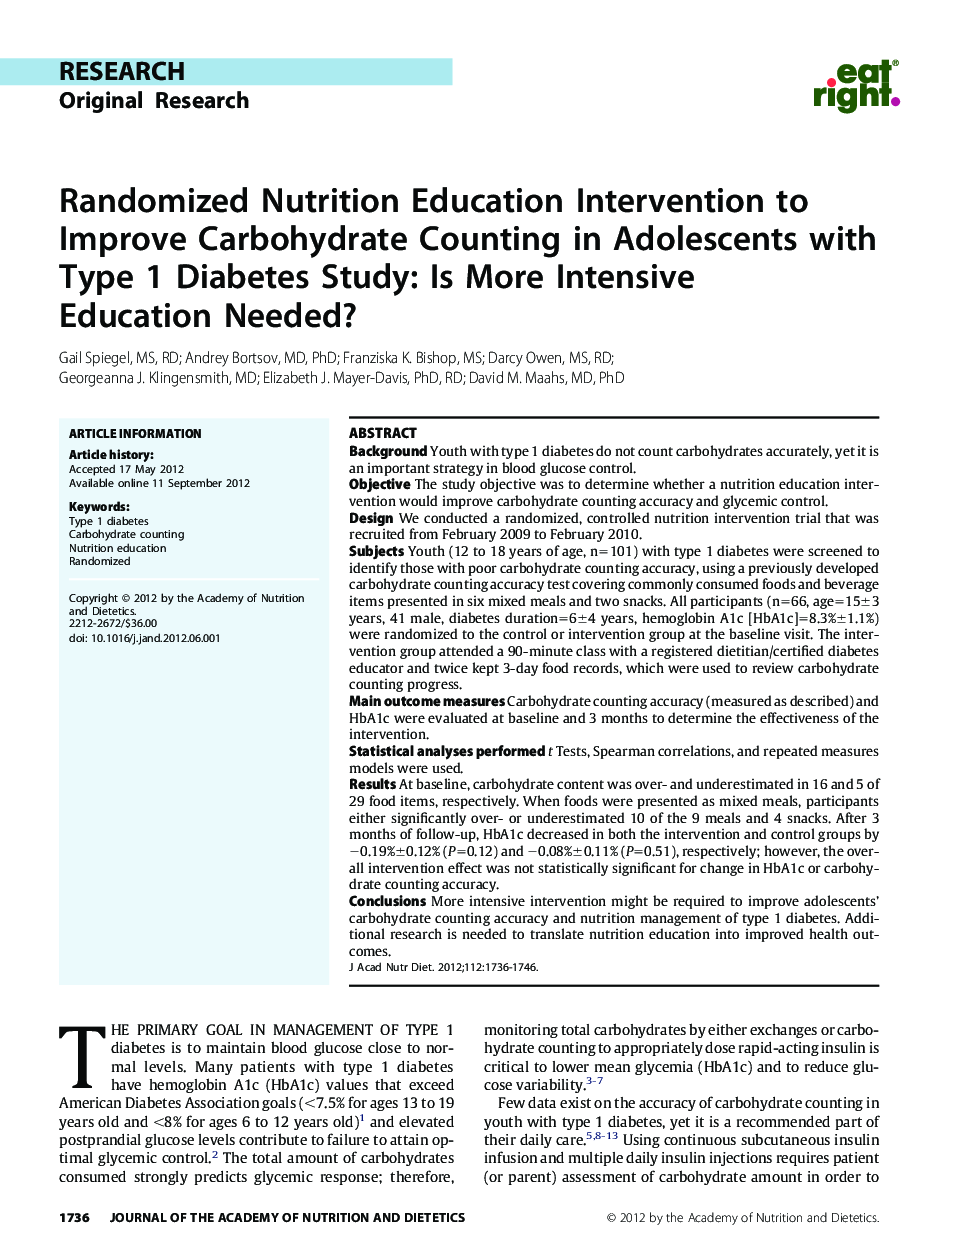 Randomized Nutrition Education Intervention to Improve Carbohydrate Counting in Adolescents with Type 1 Diabetes Study: Is More Intensive Education Needed? 